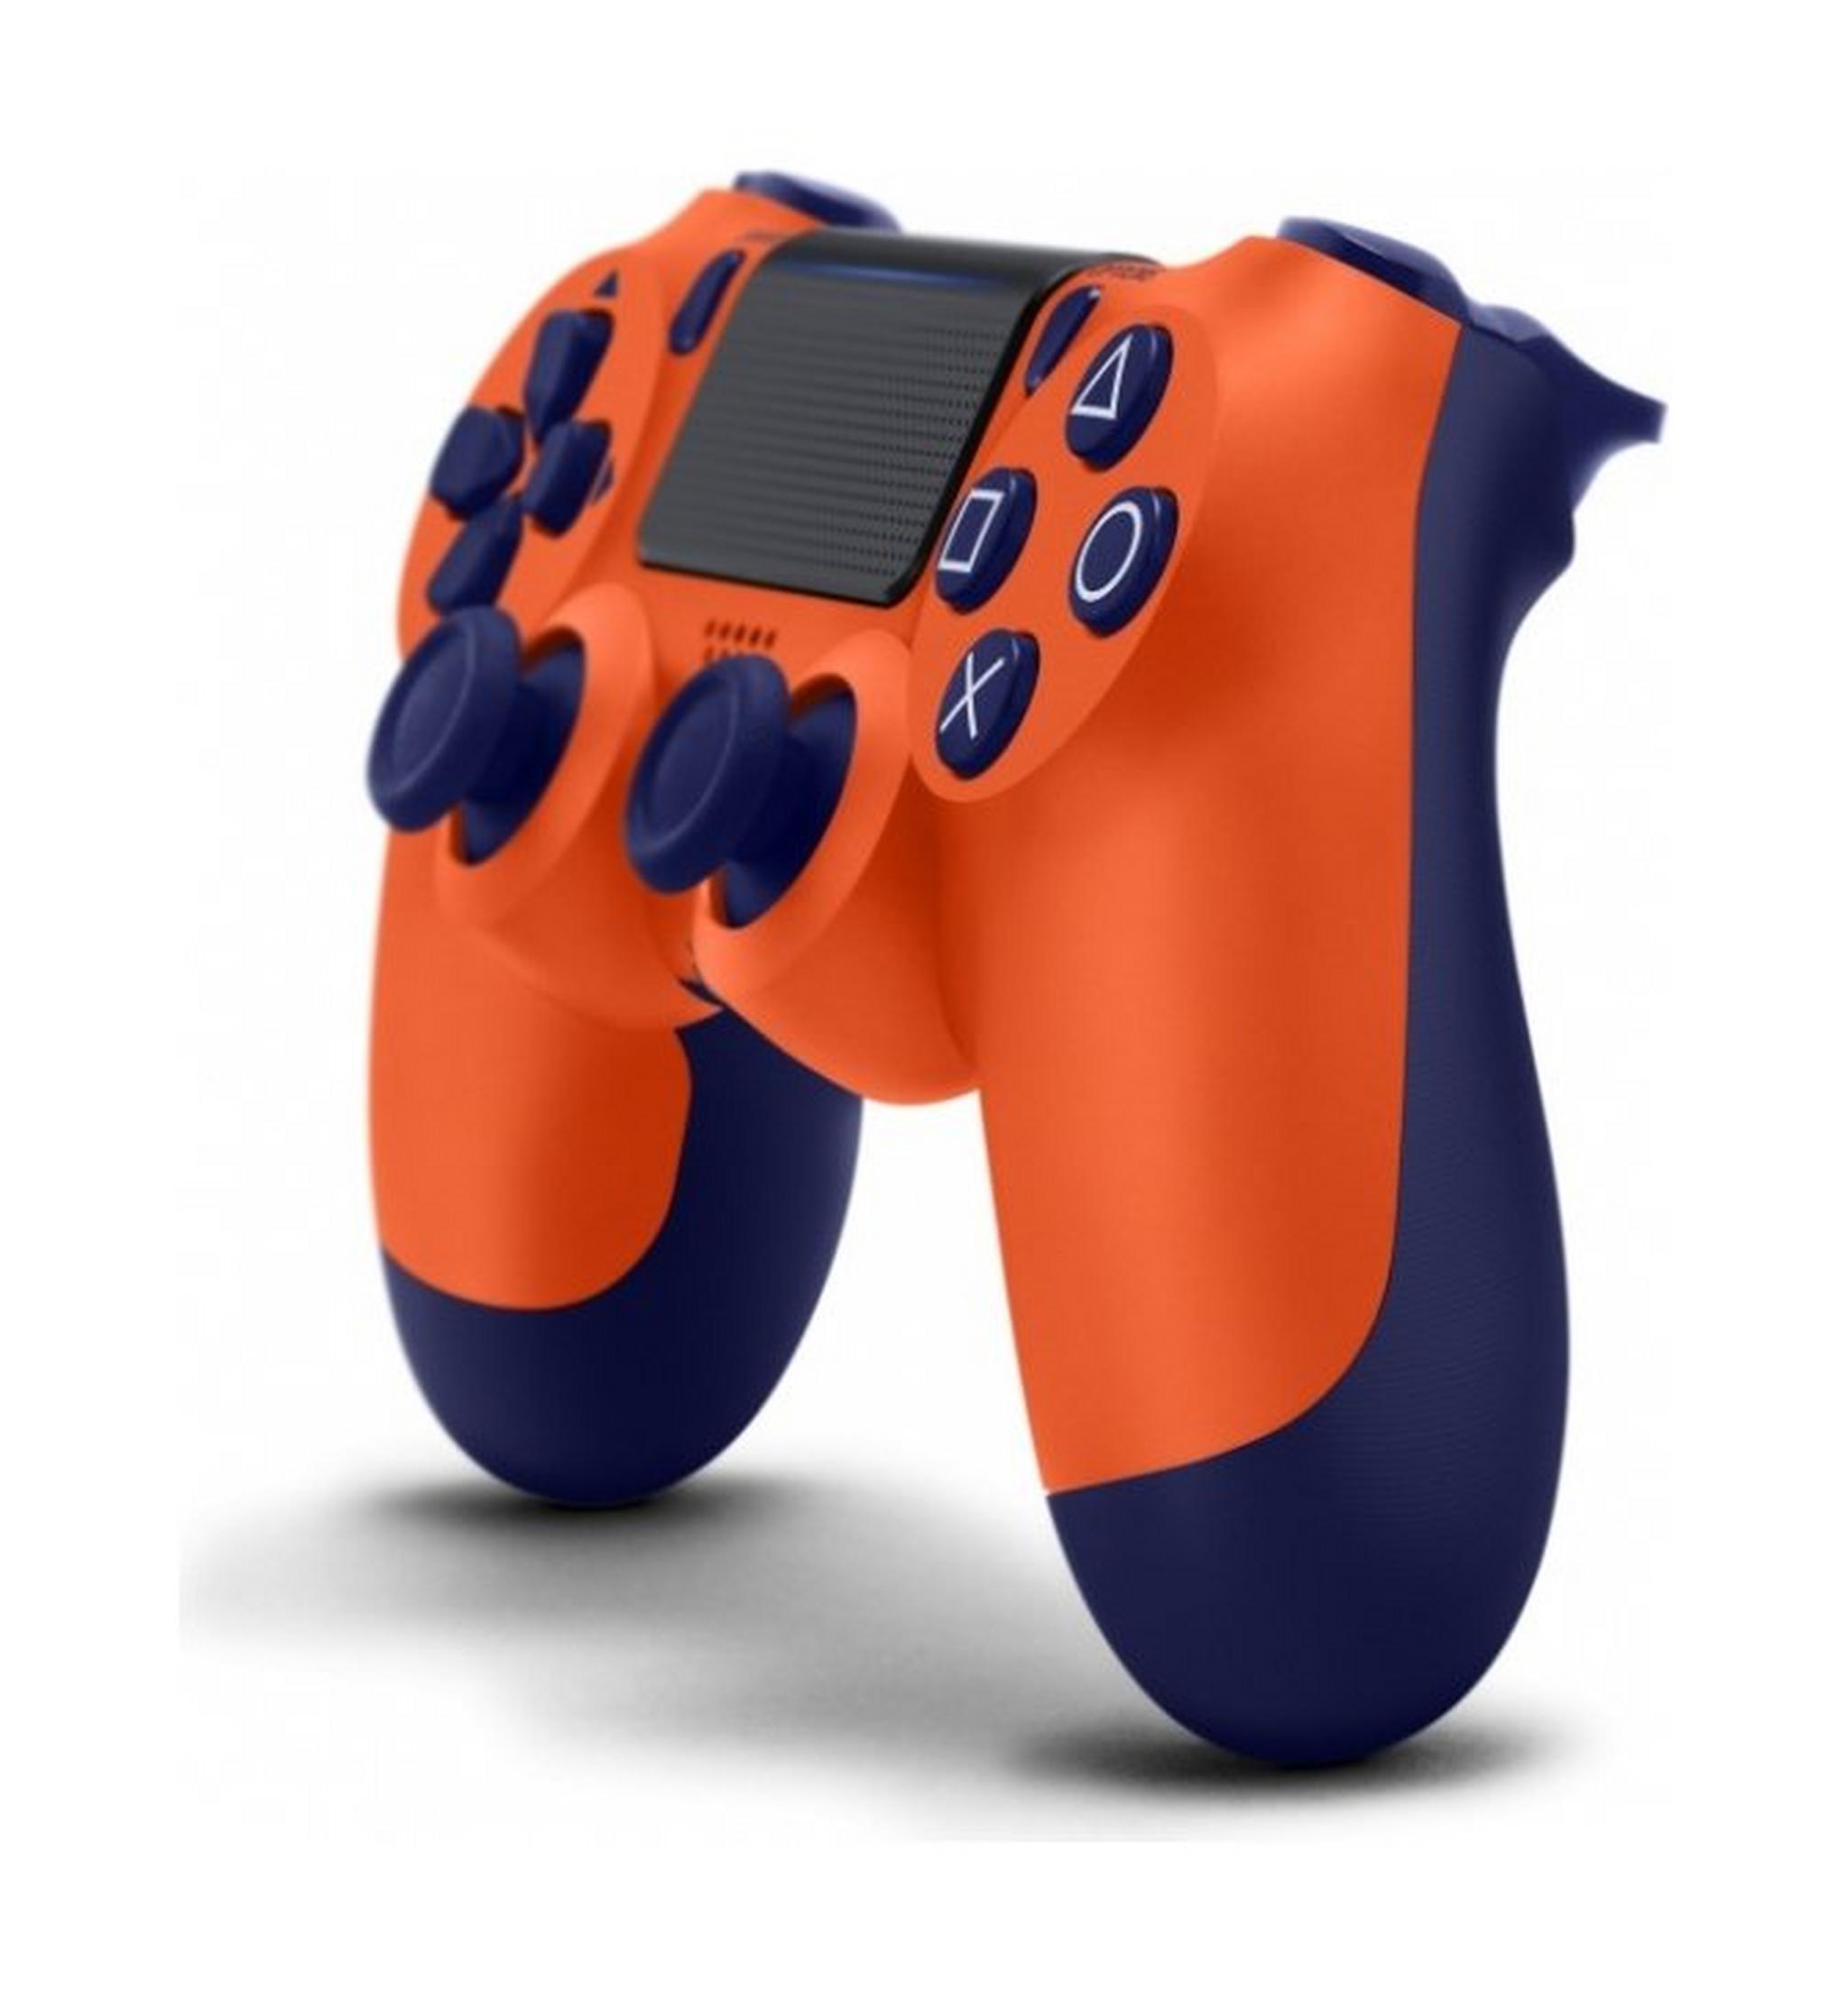 Sony PlayStation 4 DualShock 4 Soft Touch Controller - Orange